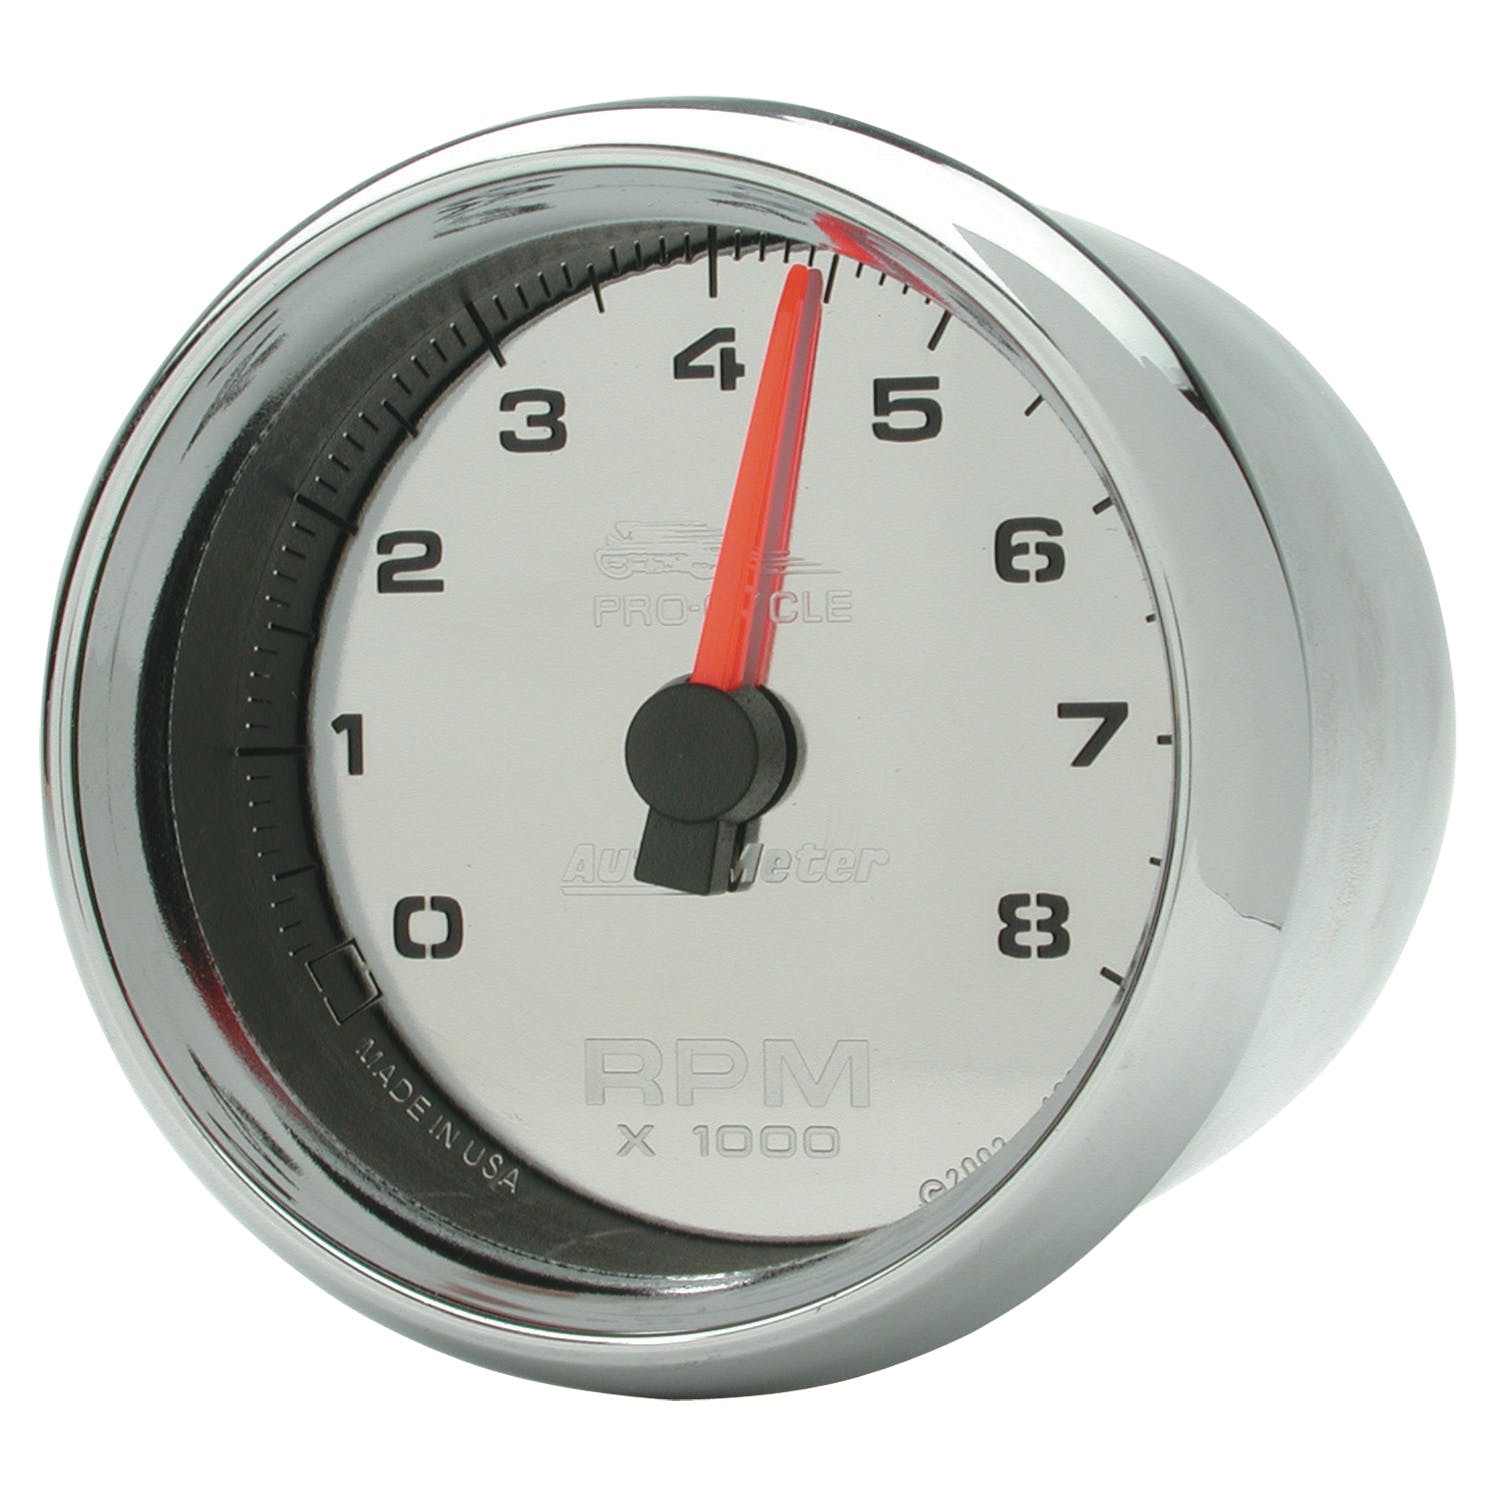 AutoMeter Products 19308 Tachometer Gauge, Chrome-Pro Cycle 2-5/8, 8K RPM, 2and4 Cylinder